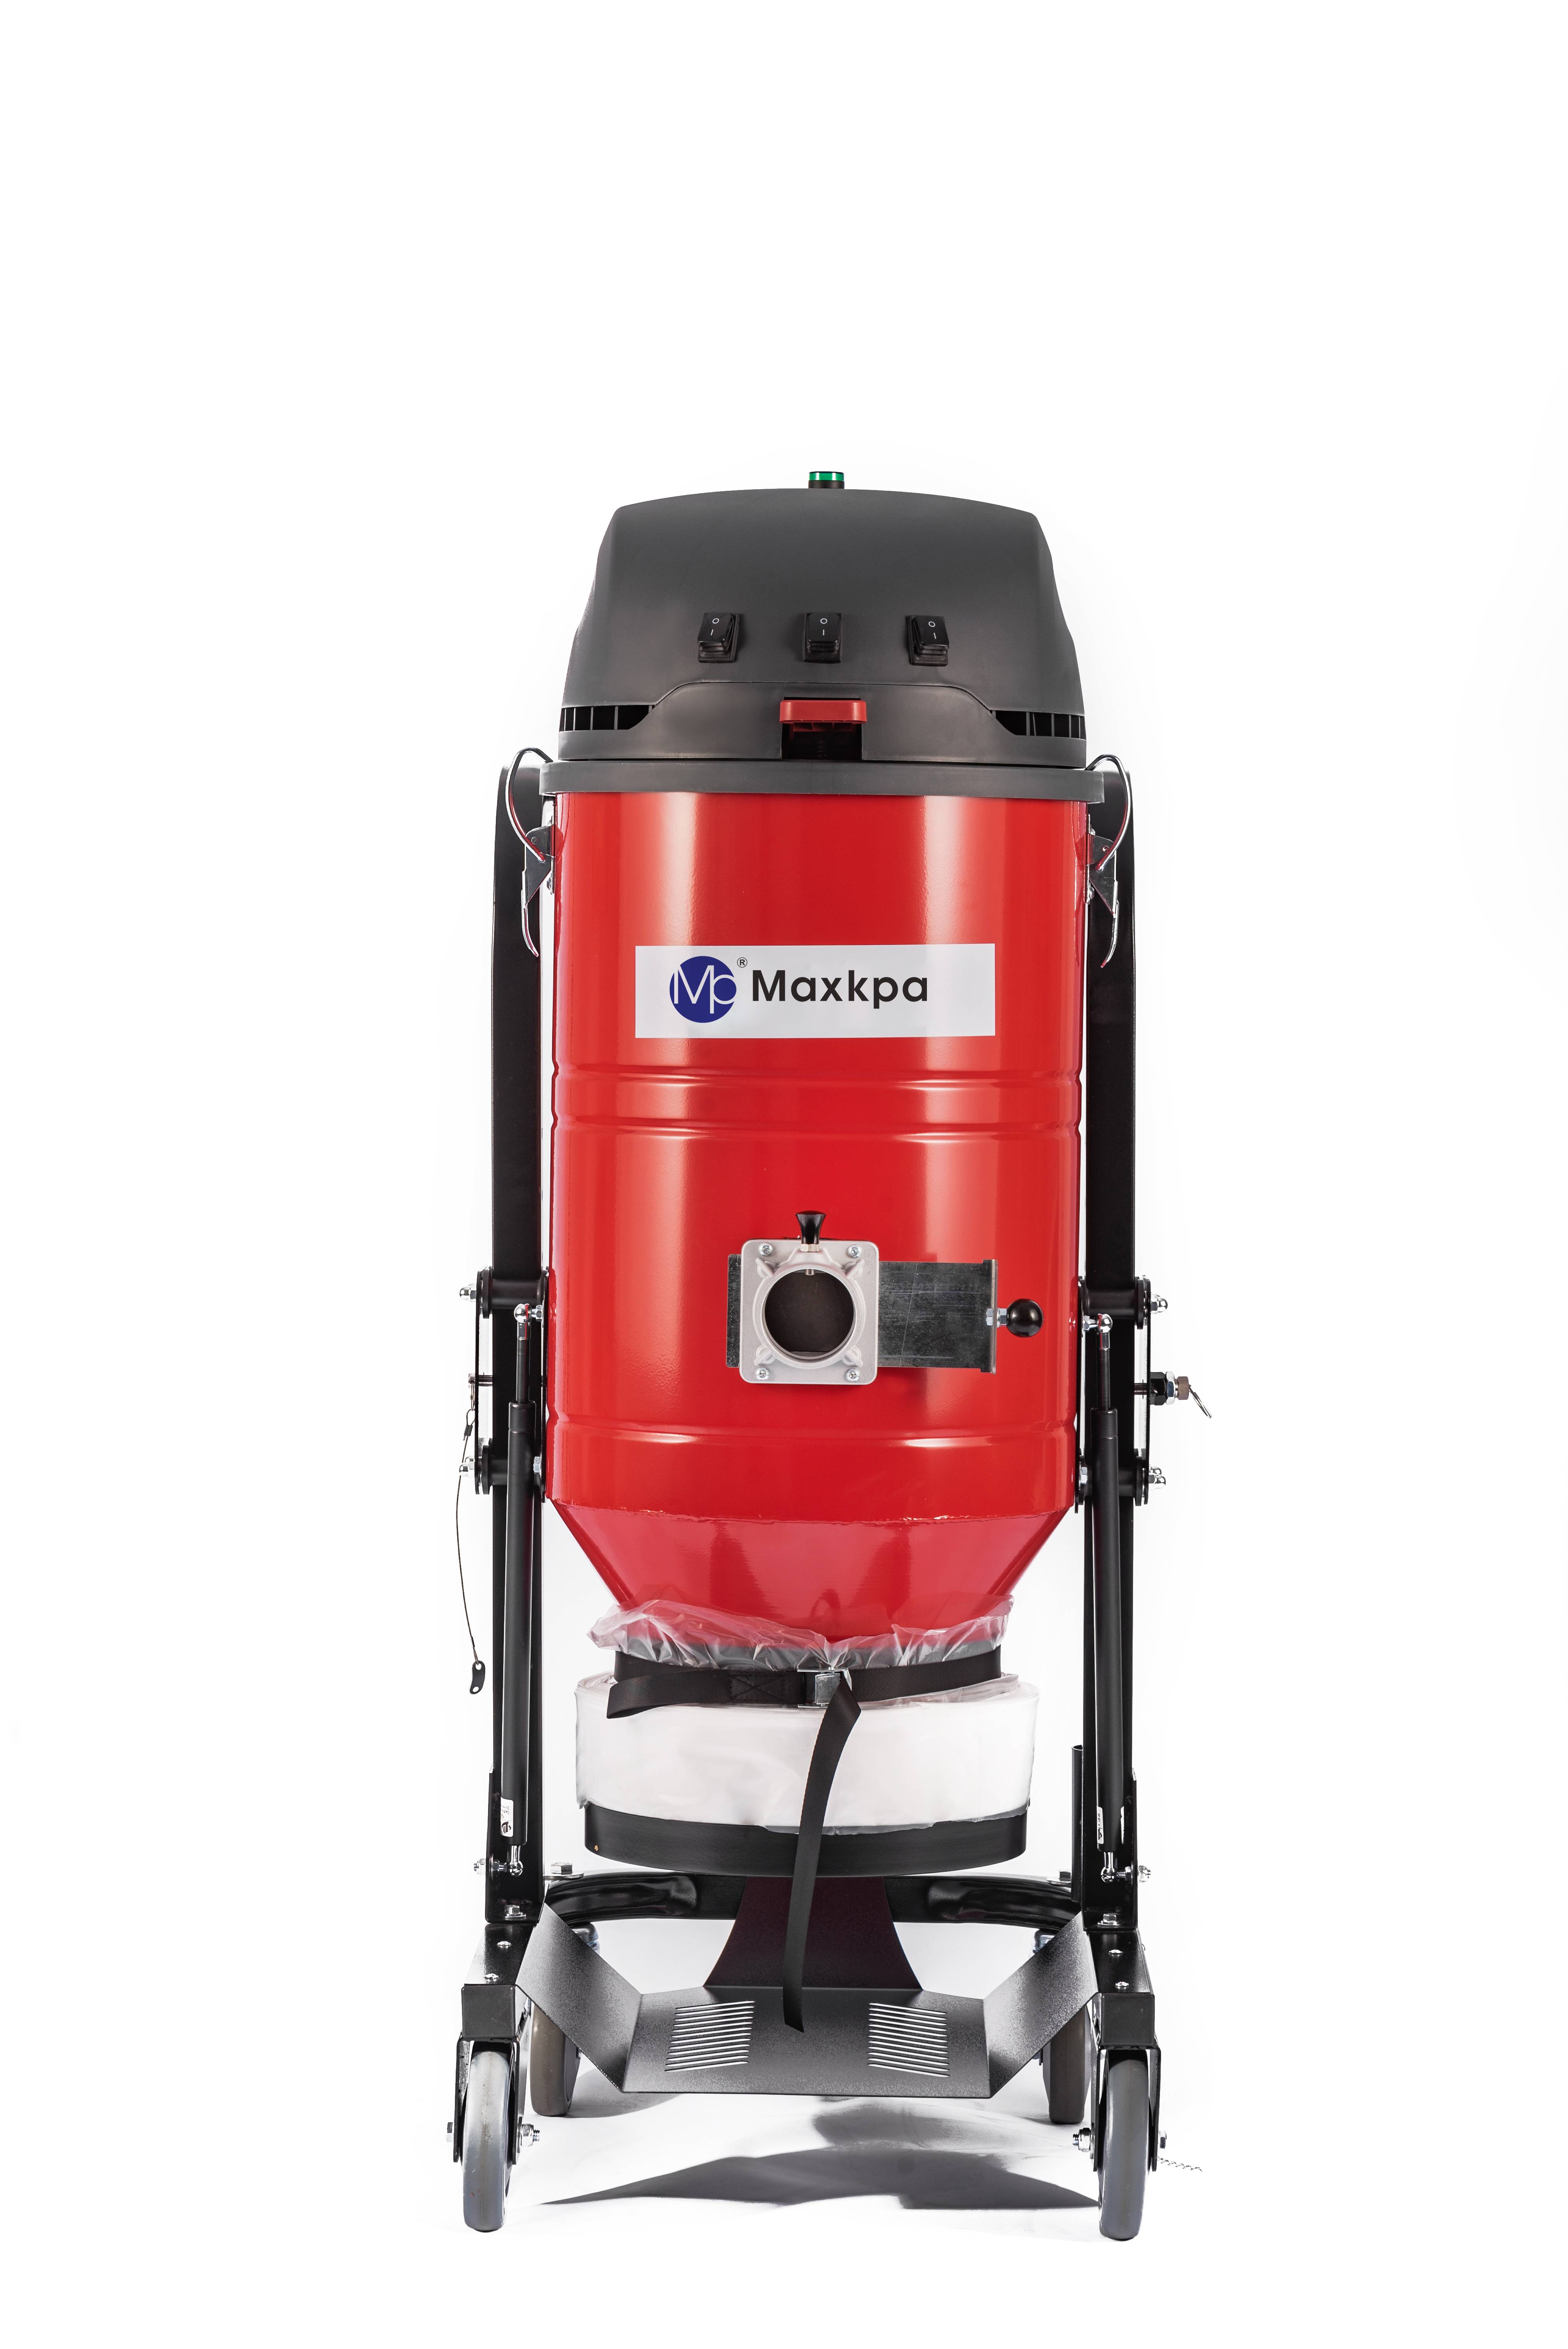 The Industrial Vacuum Cleaner Market: An Overview